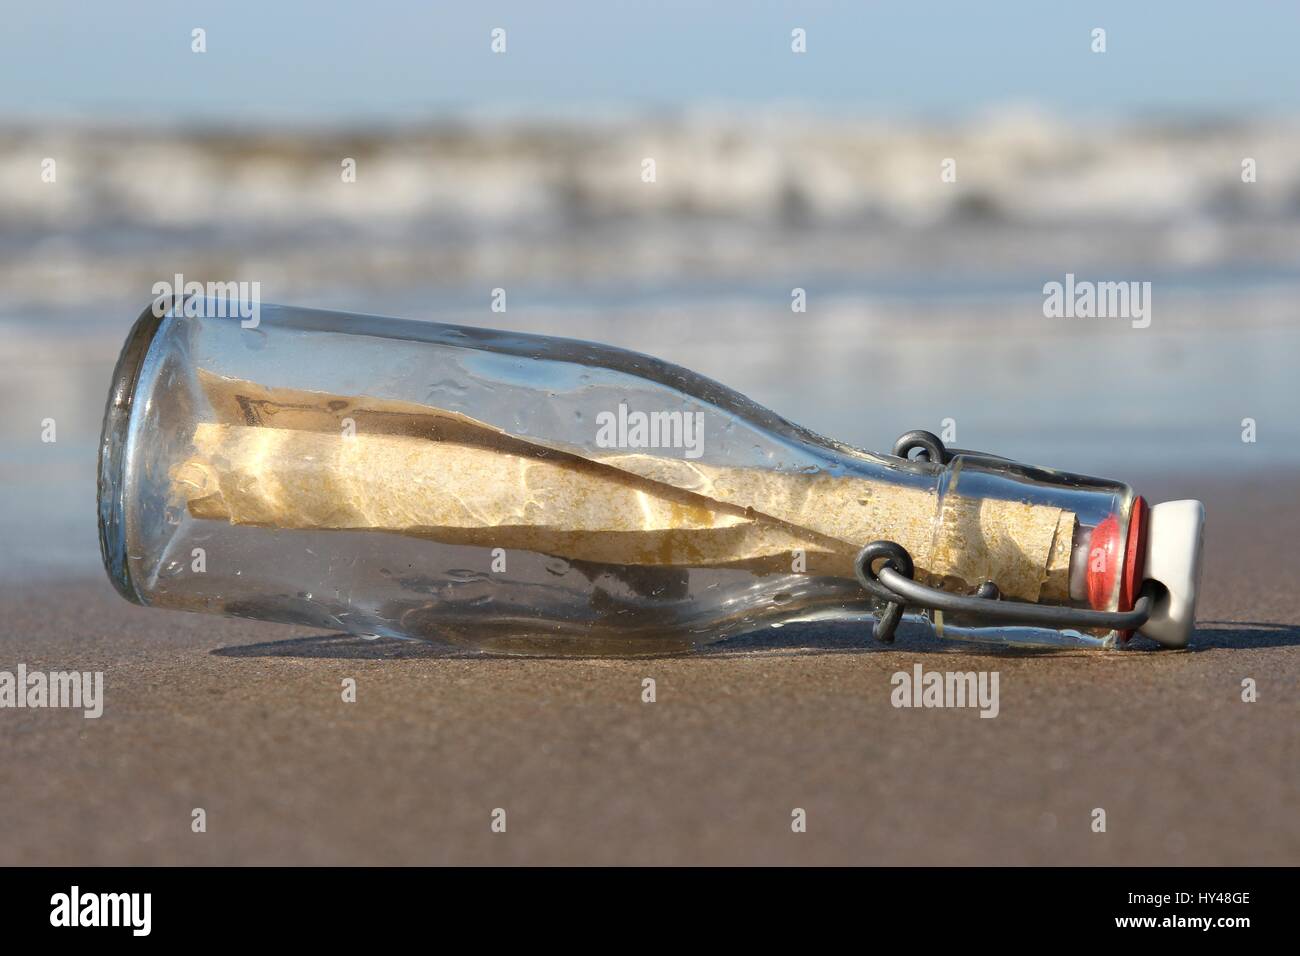 https://c8.alamy.com/comp/HY48GE/message-in-a-bottle-stranded-on-the-beach-HY48GE.jpg